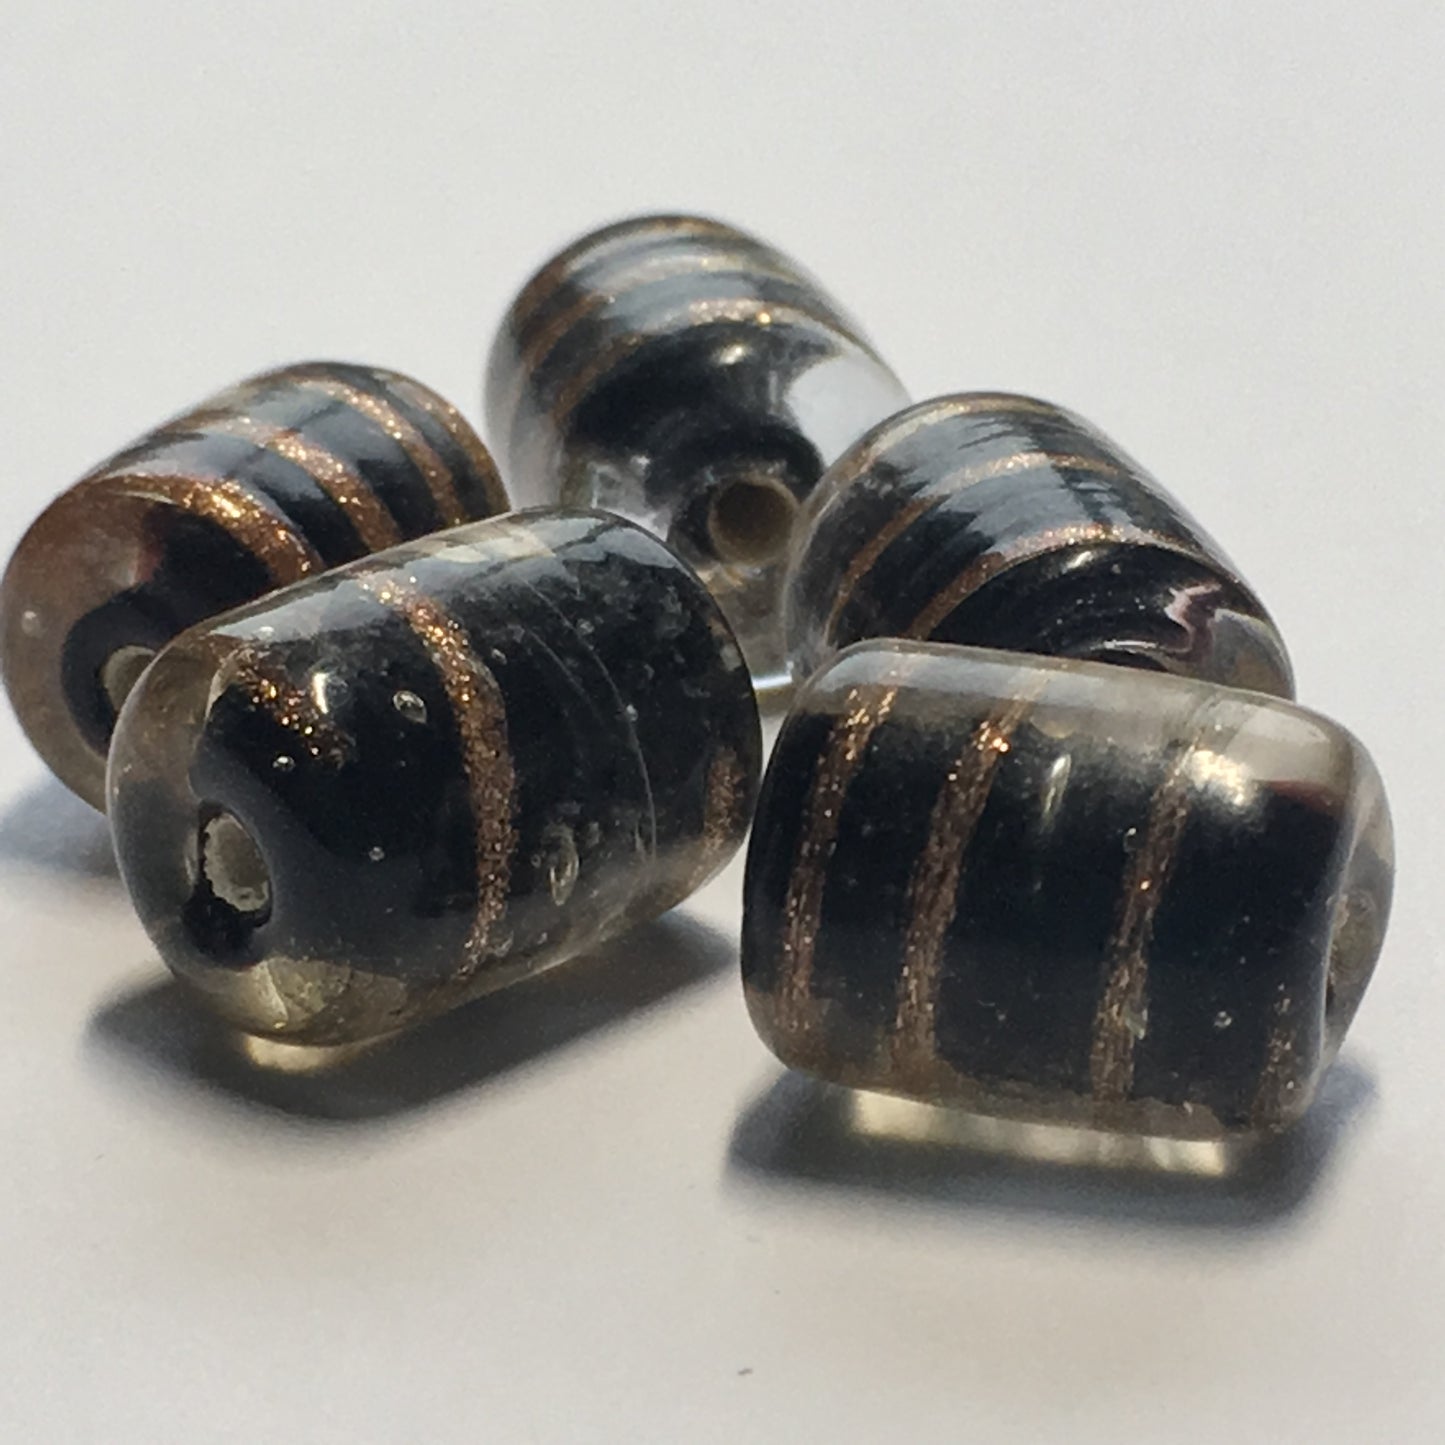 Clear Black Lined Glass Lampwork Barrel Beads with Copper Foil Swirls, 12 x 9 mm, 5 Beads